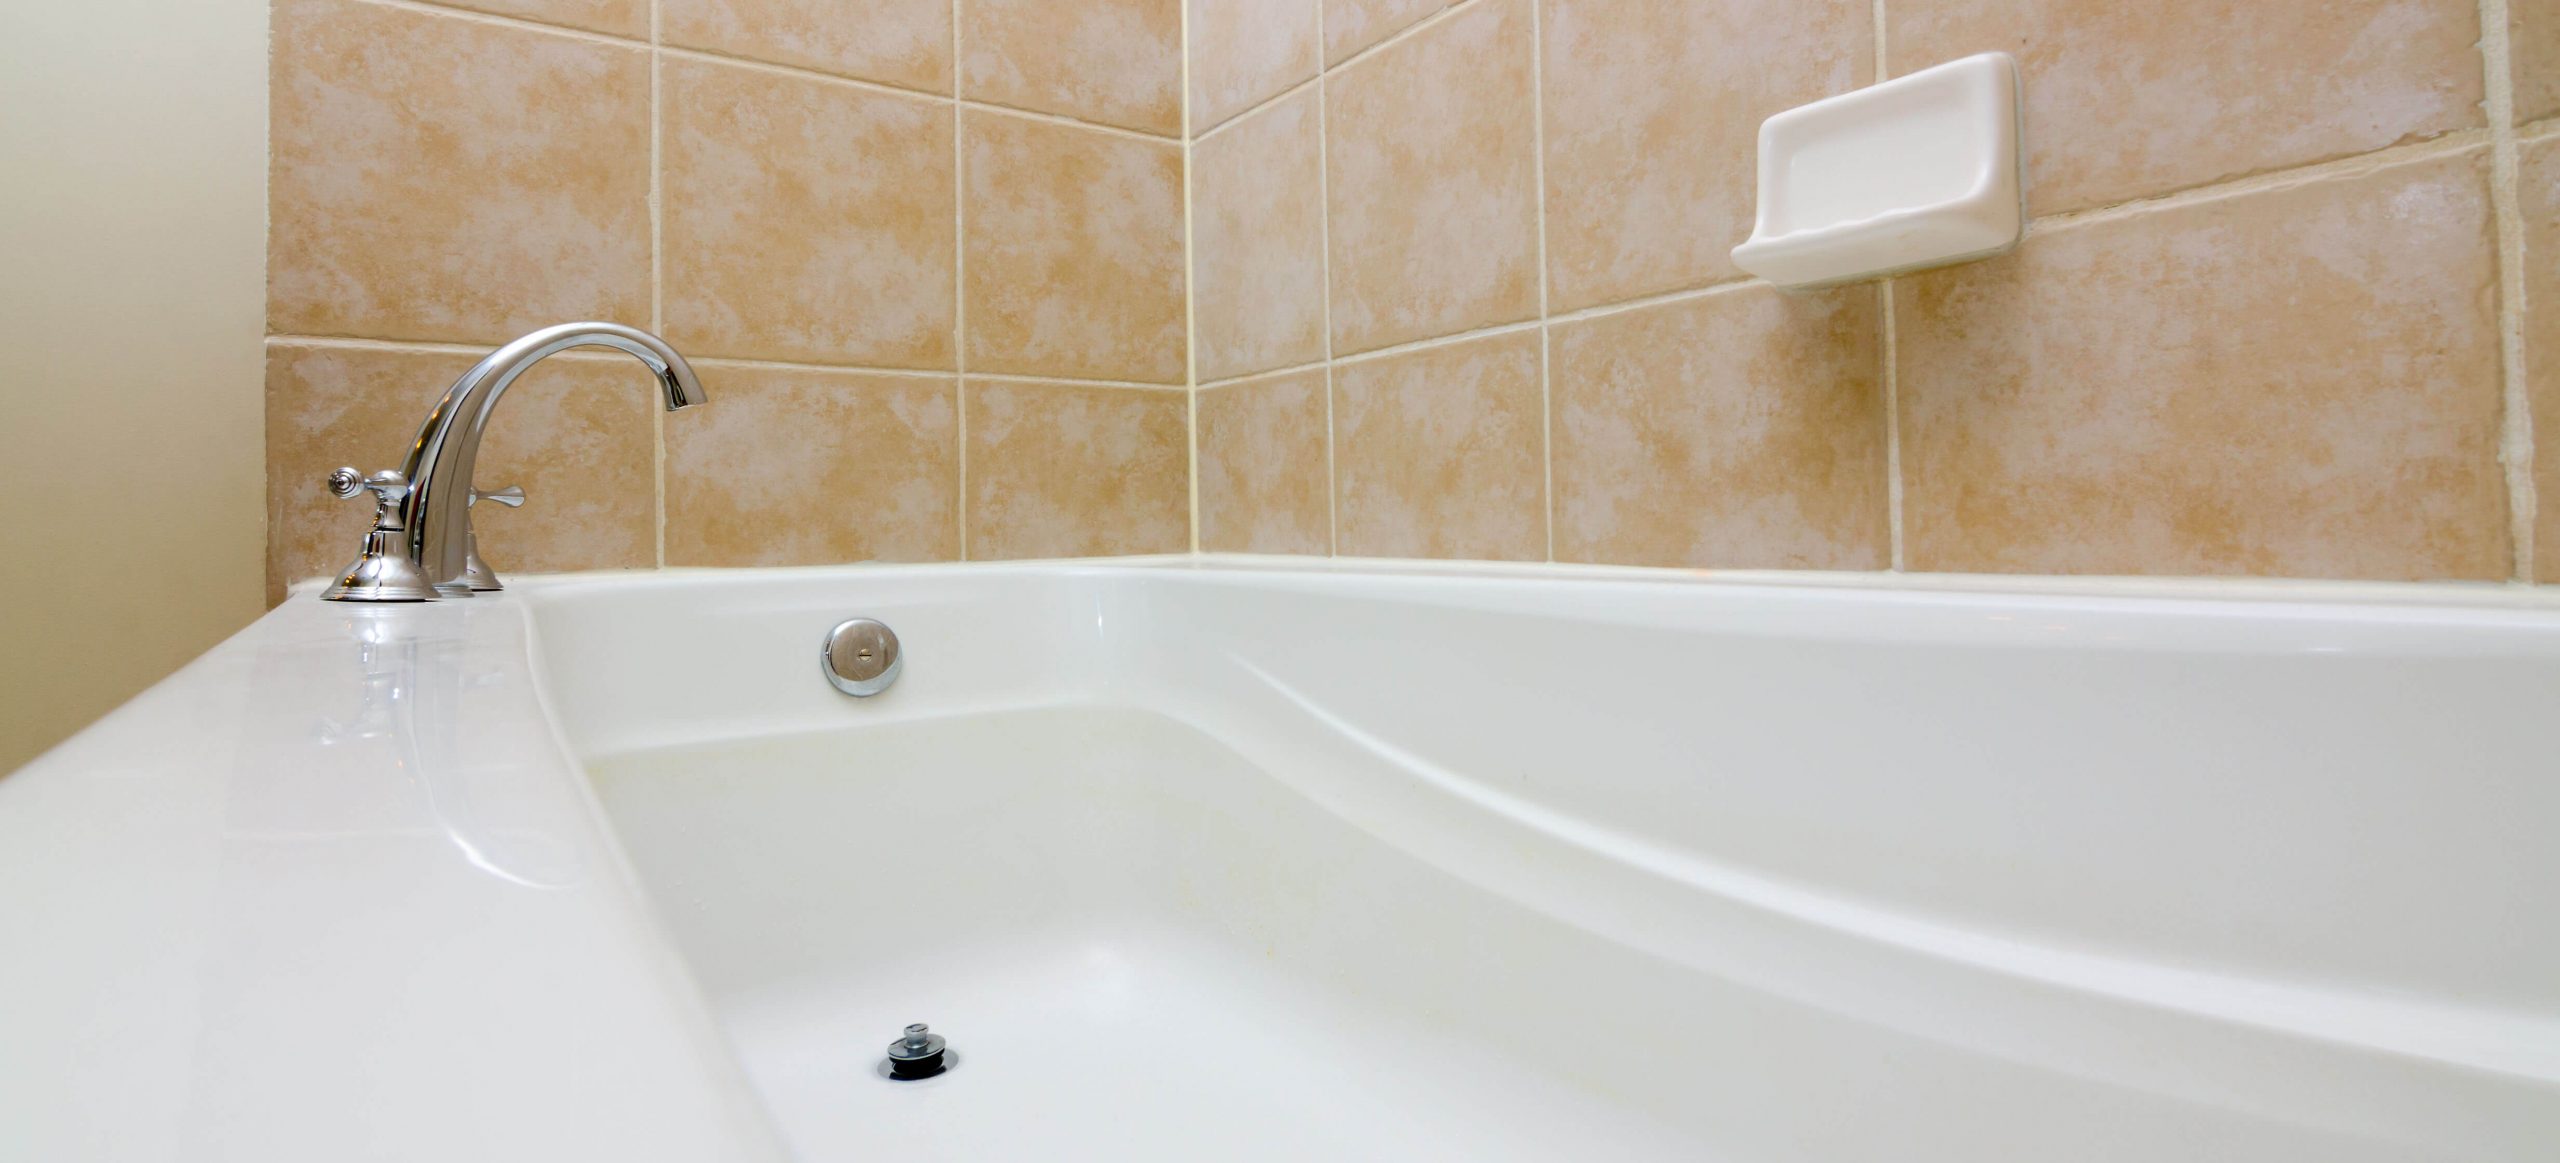 How To Unclog A Bathtub Drain Without Vinegar